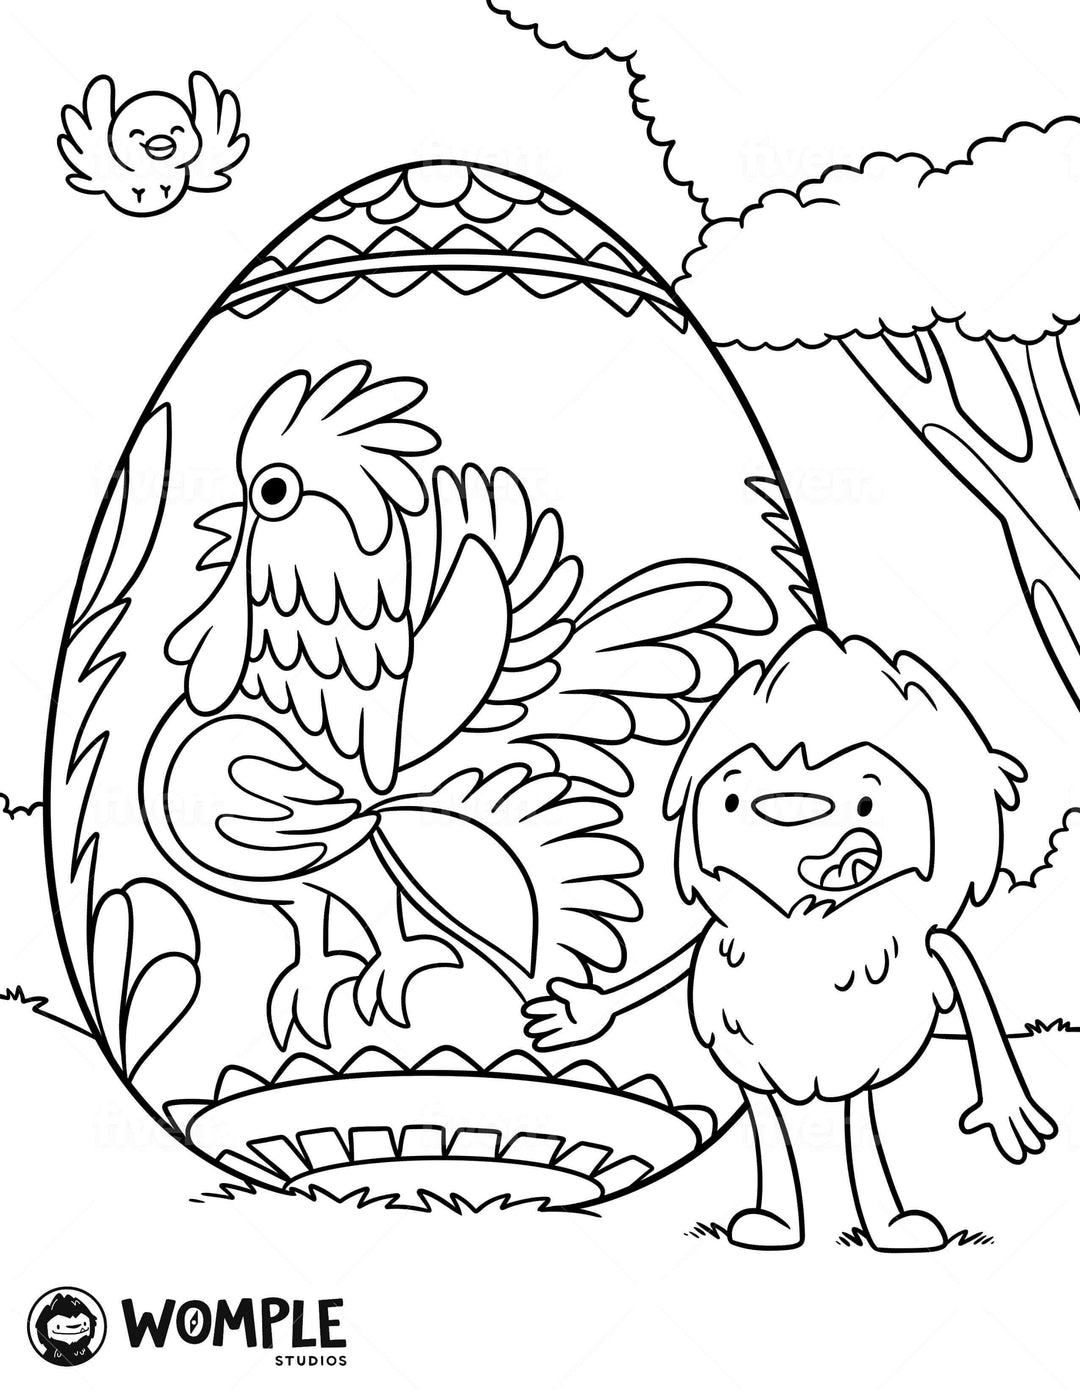 Womple with a pisanki Polish easter egg coloring page